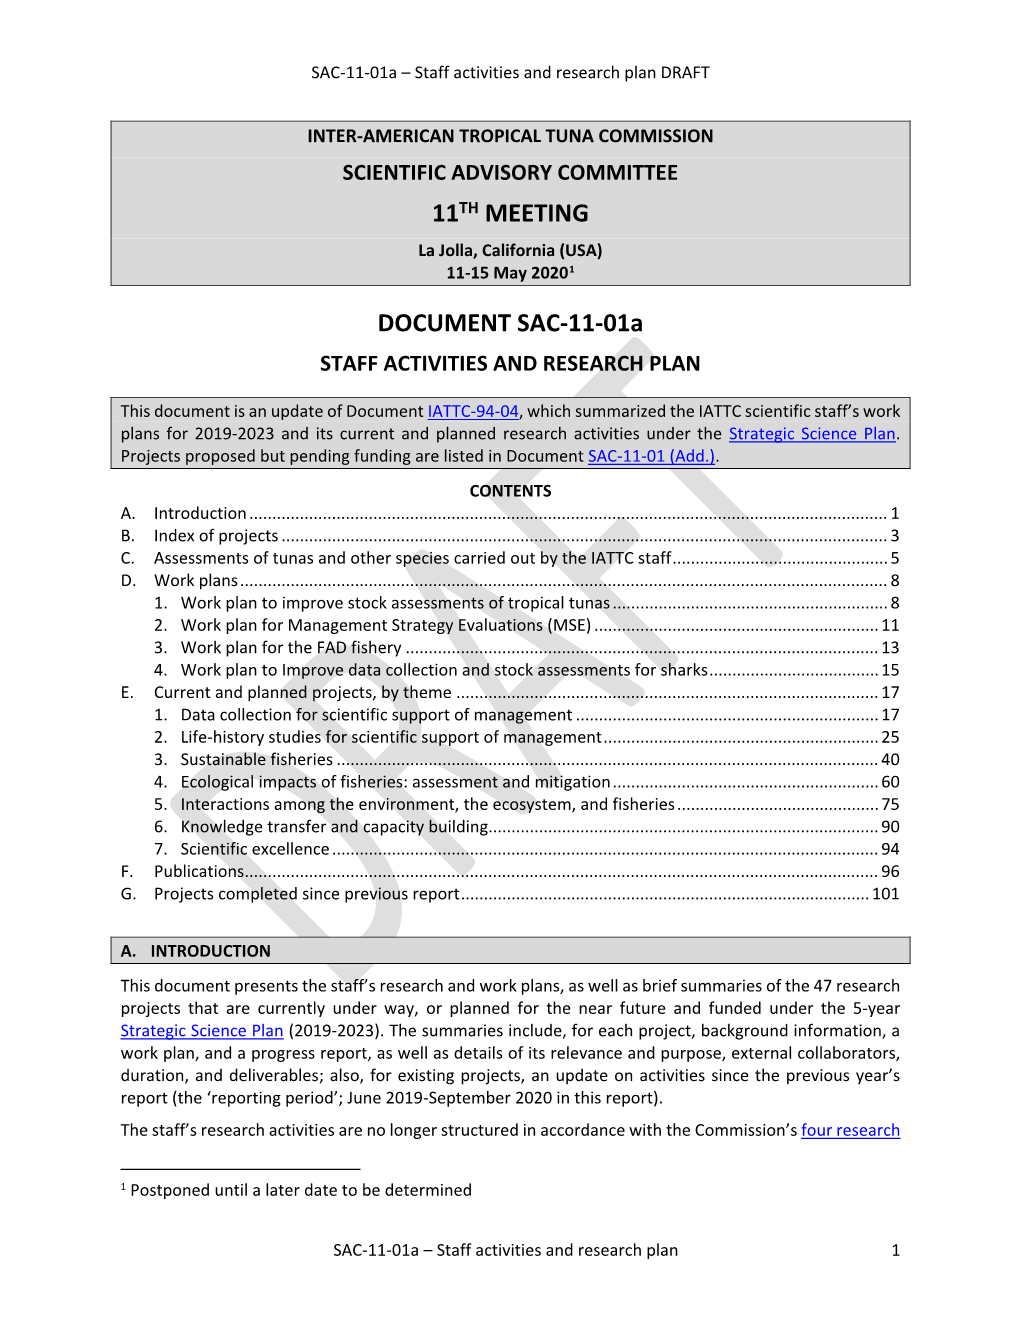 SAC-11-01A – Staff Activities and Research Plan DRAFT